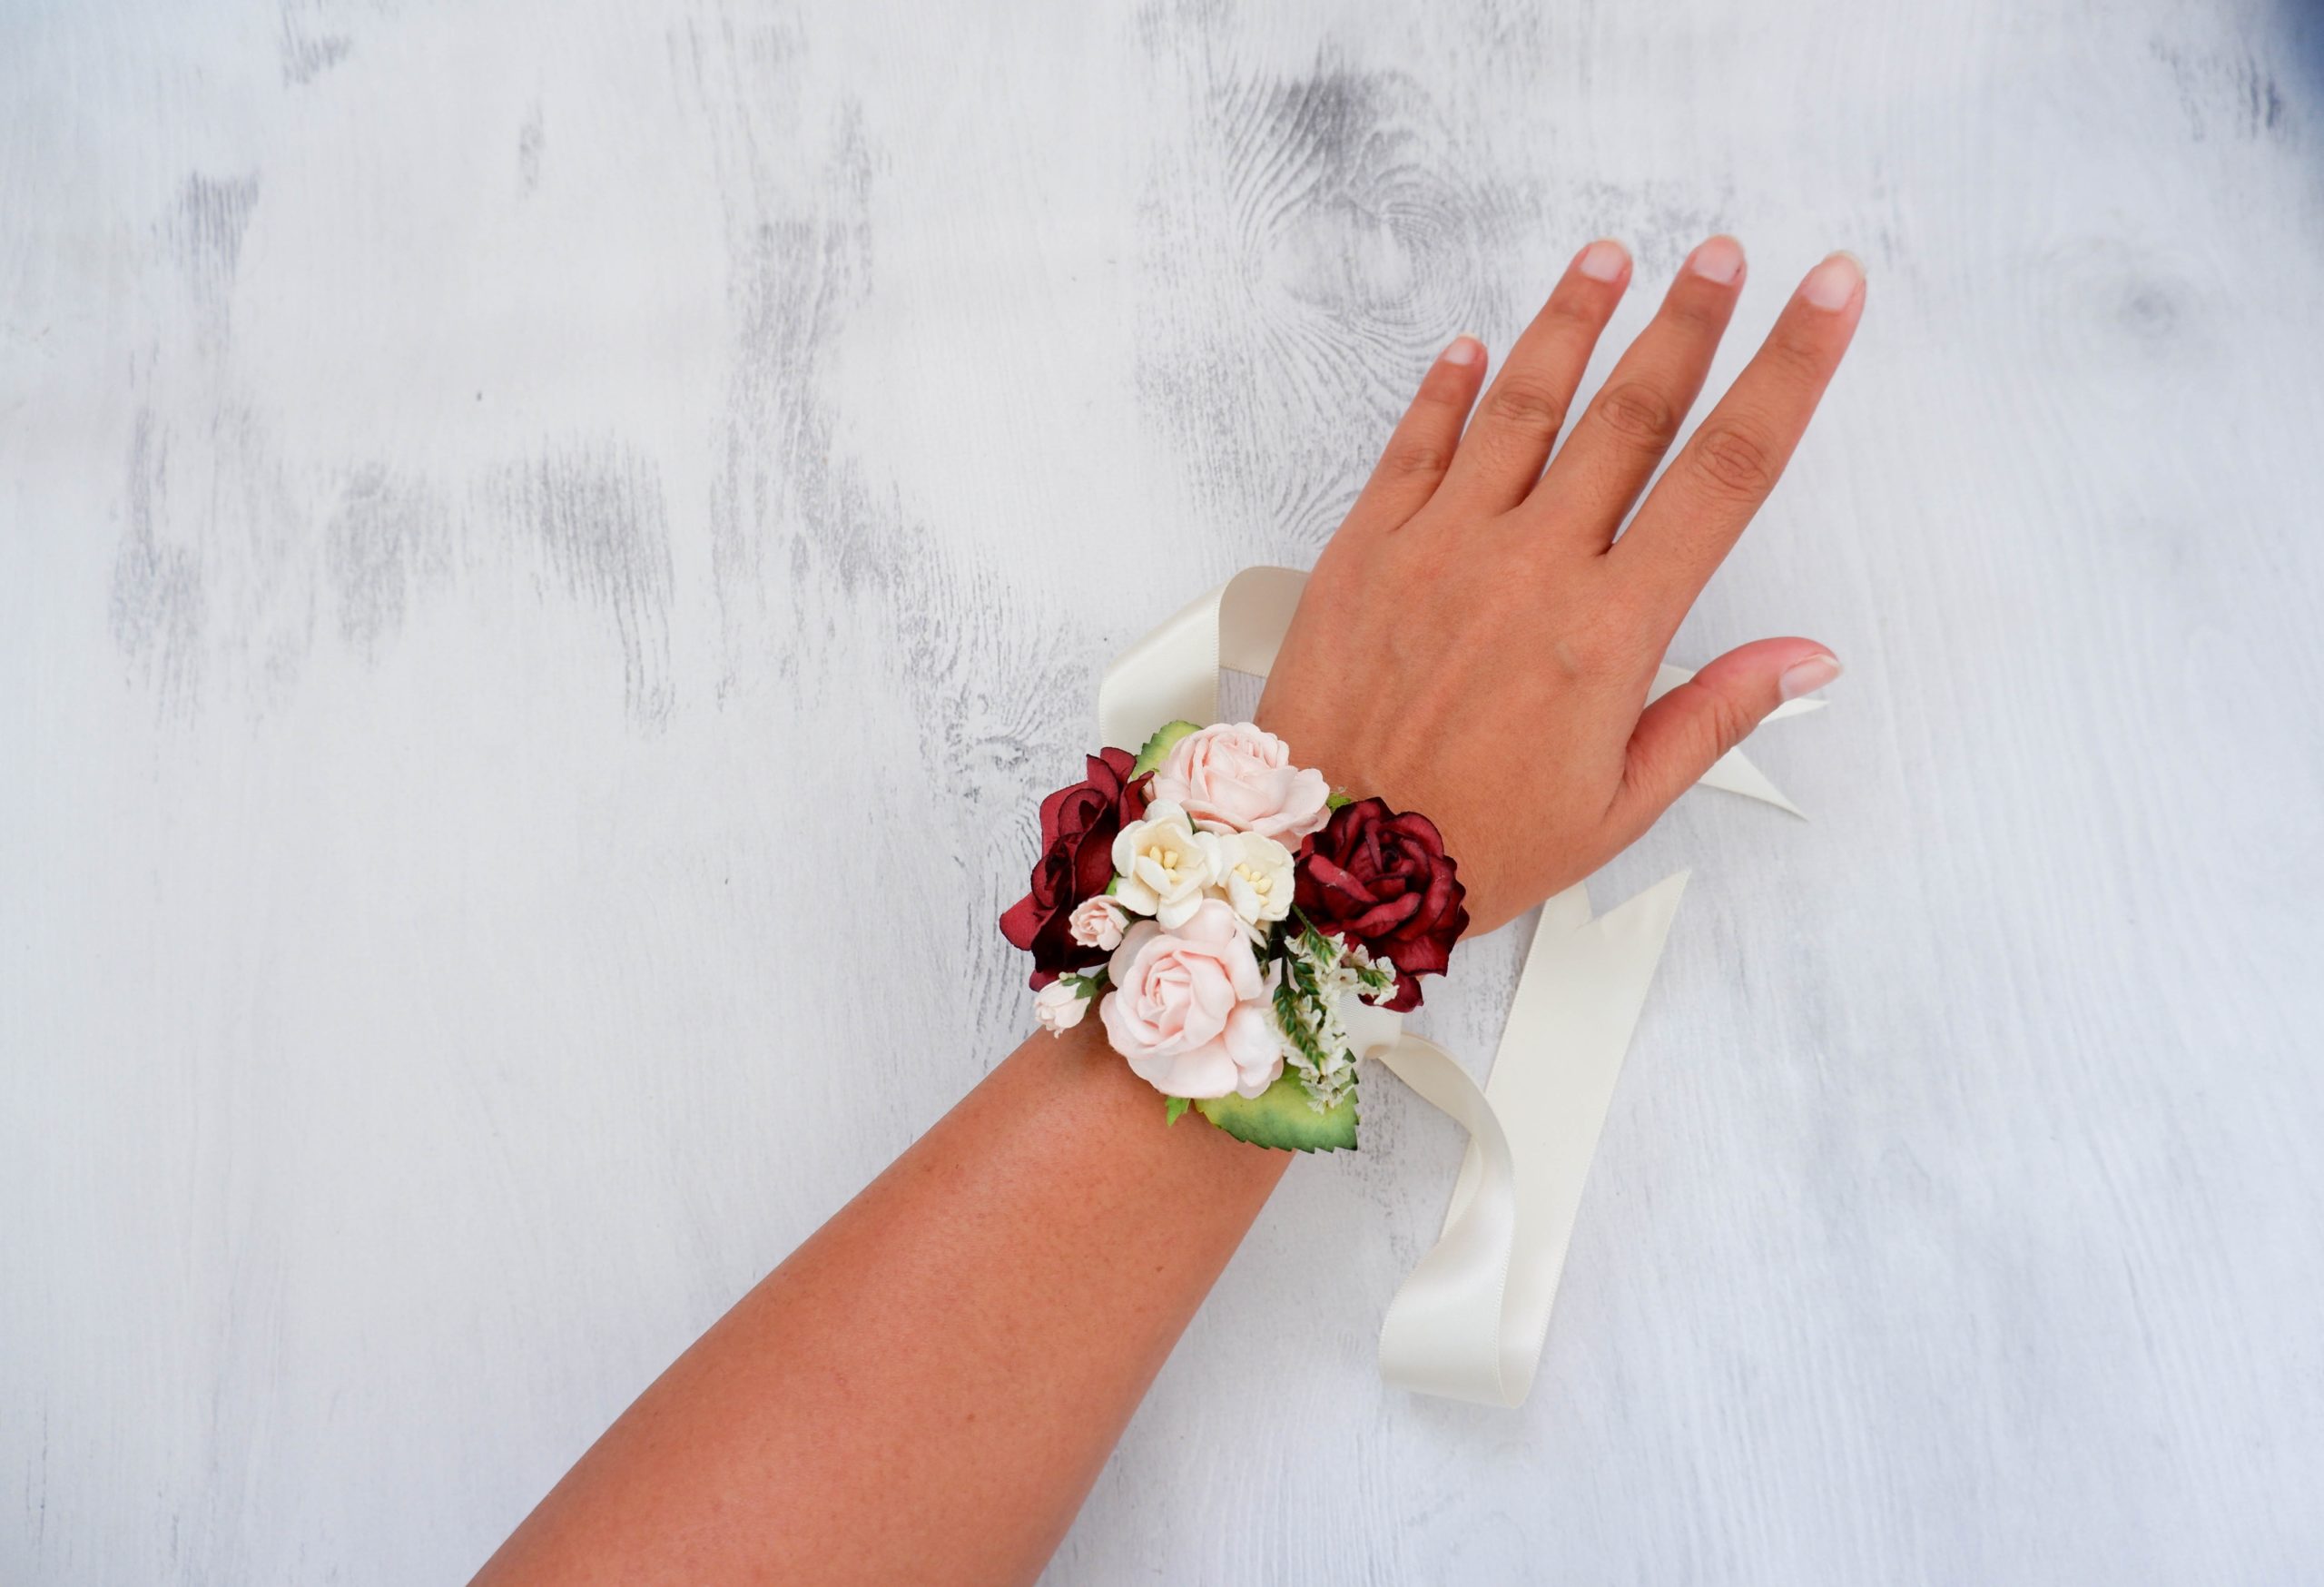 Buy Campsis Wedding Wrist Flower Corsage Bracelet Bridesmaid Hand Flower  for Wedding Festival Beach Party Prom (Red wine) Online at Low Prices in  India - Amazon.in